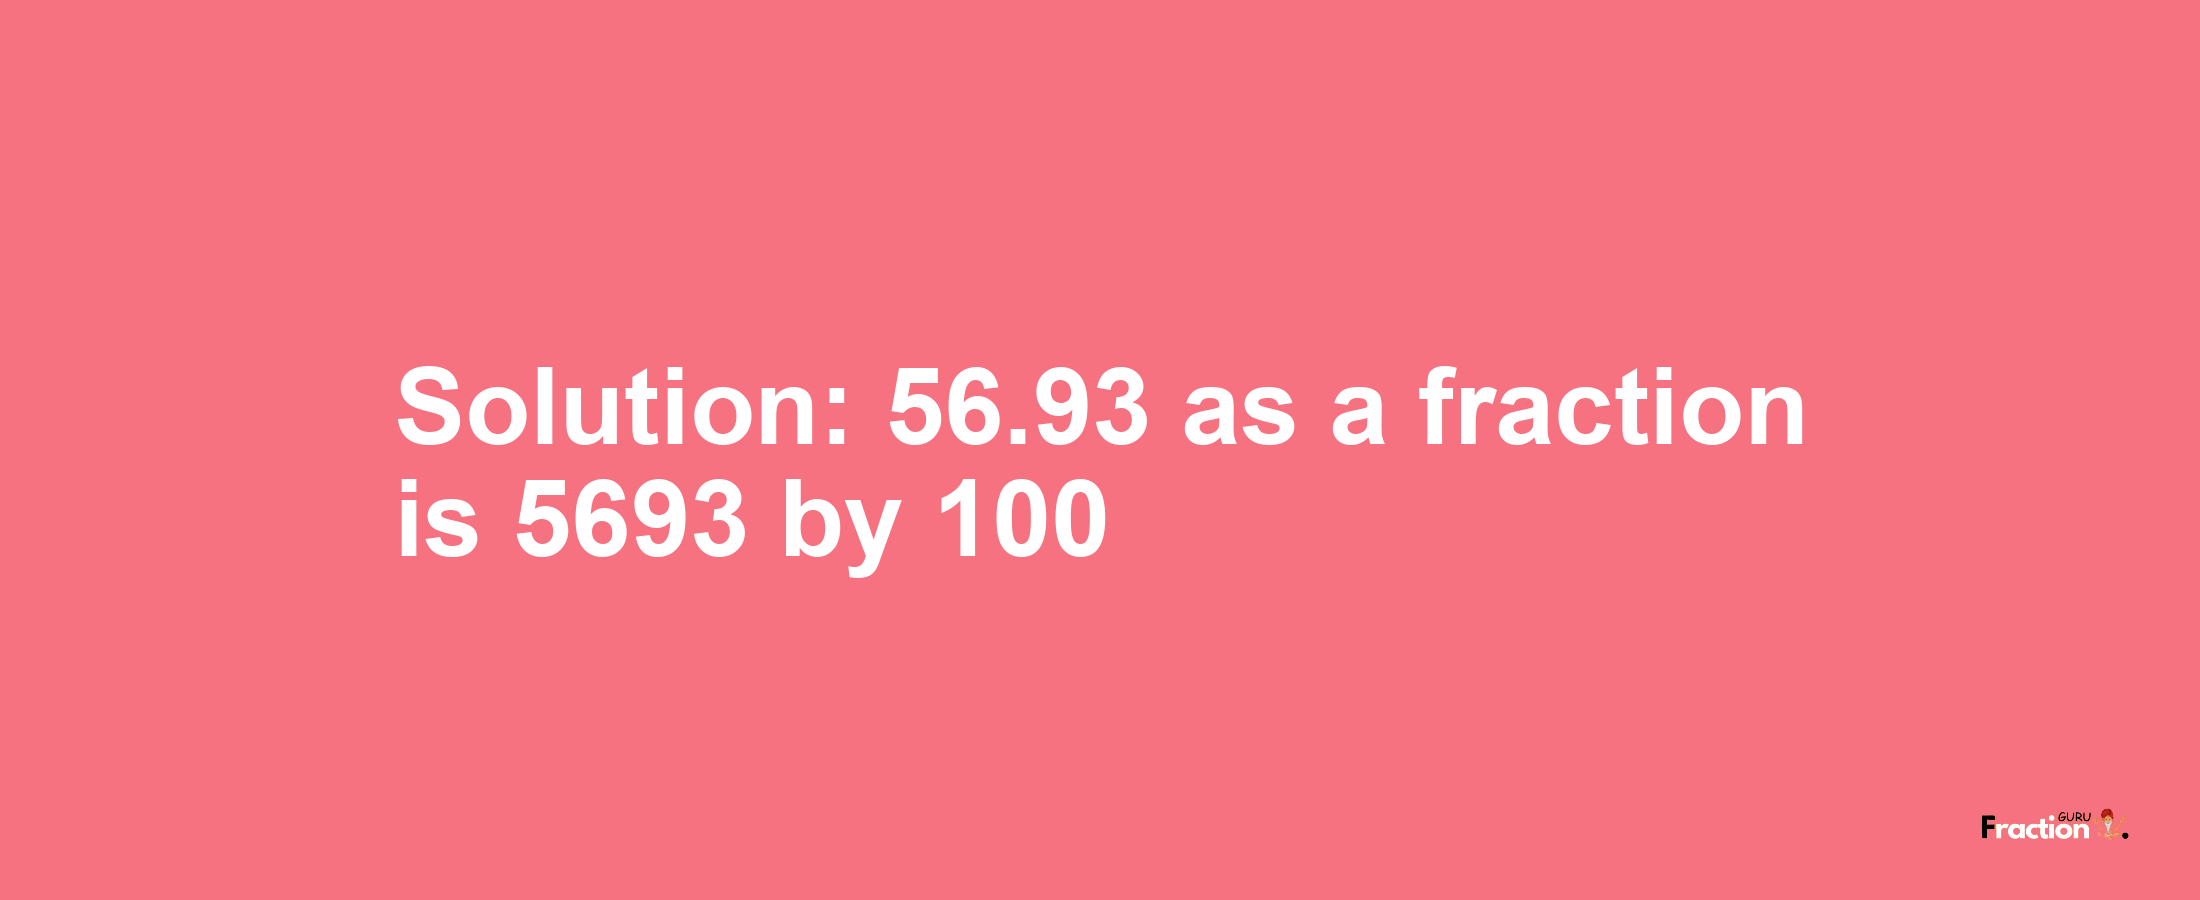 Solution:56.93 as a fraction is 5693/100